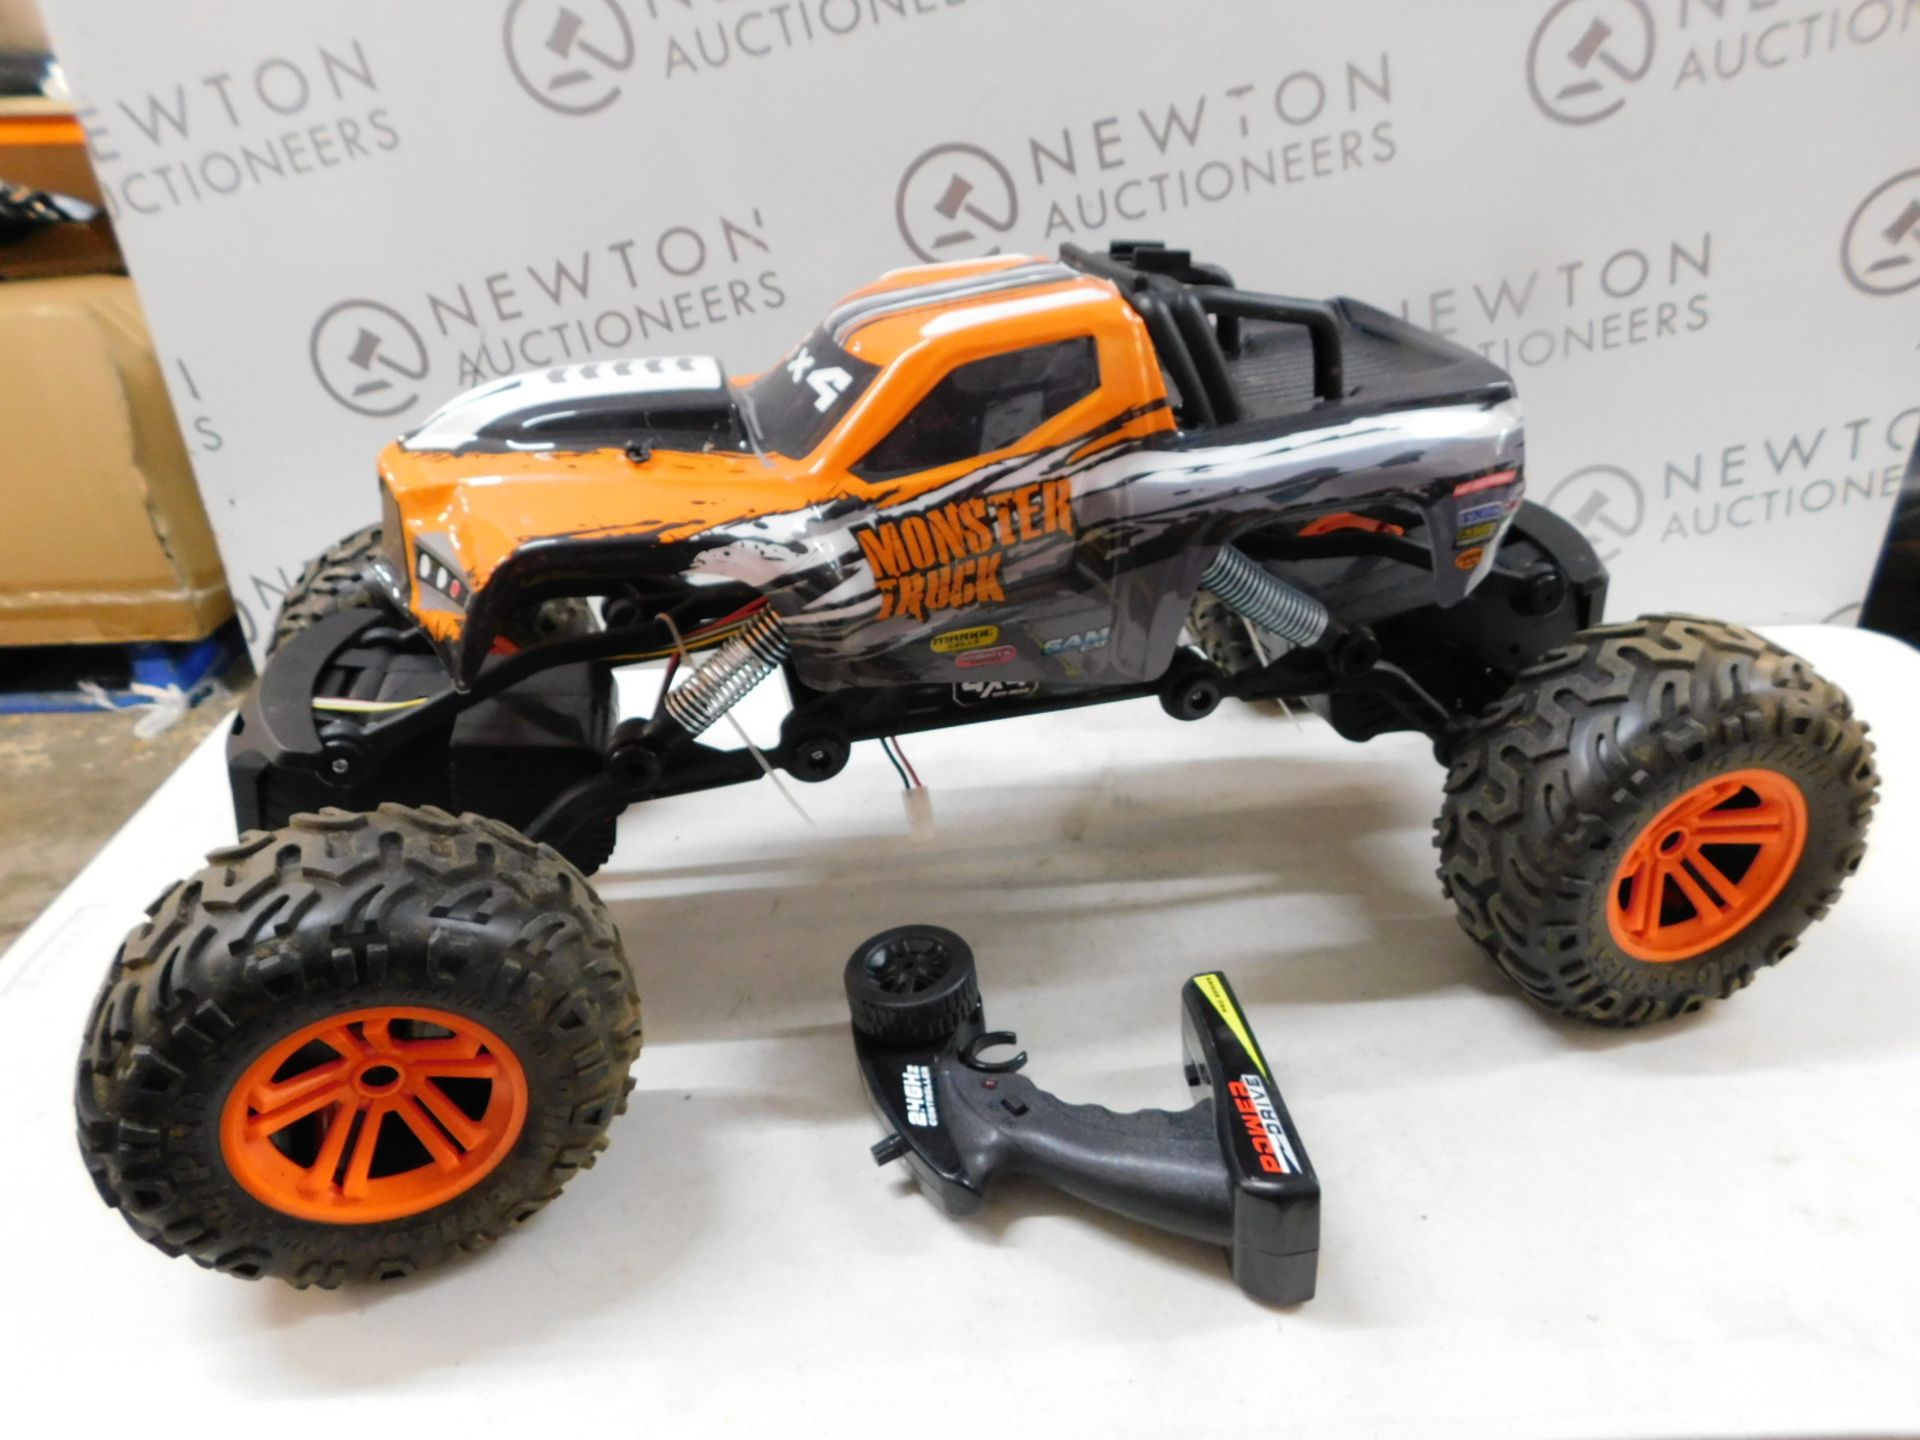 1 POWER DRIVE REMOTE CONTROL MONSTER TRUCK RRP Â£89.99